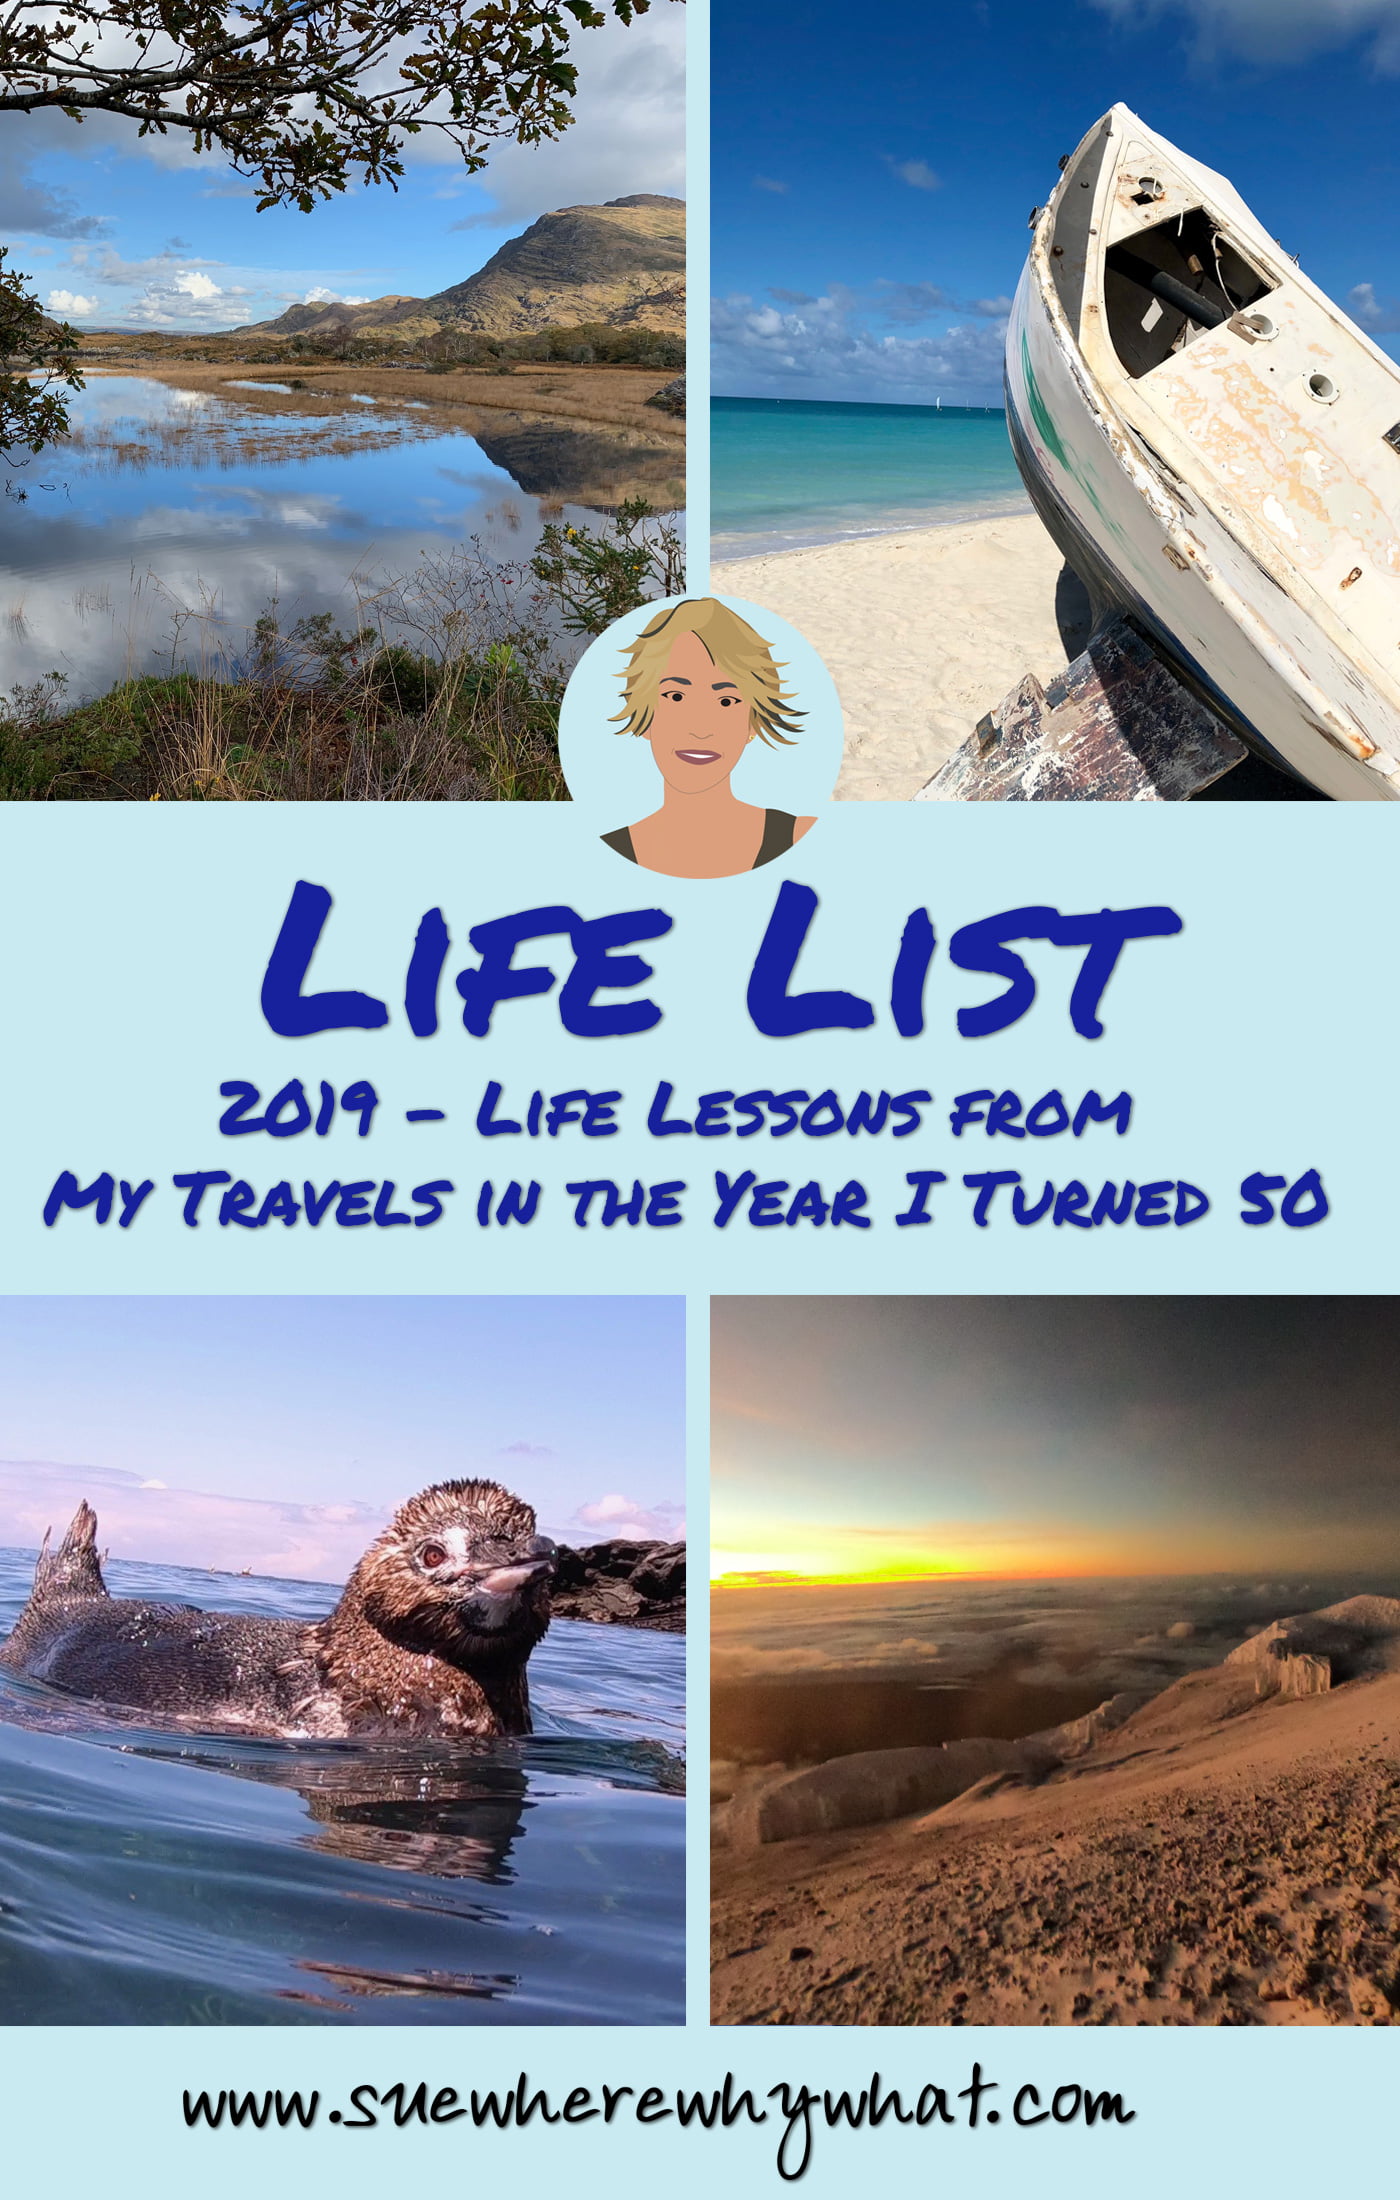 2019 – Life Lessons from My Travels in the Year I Turned 50